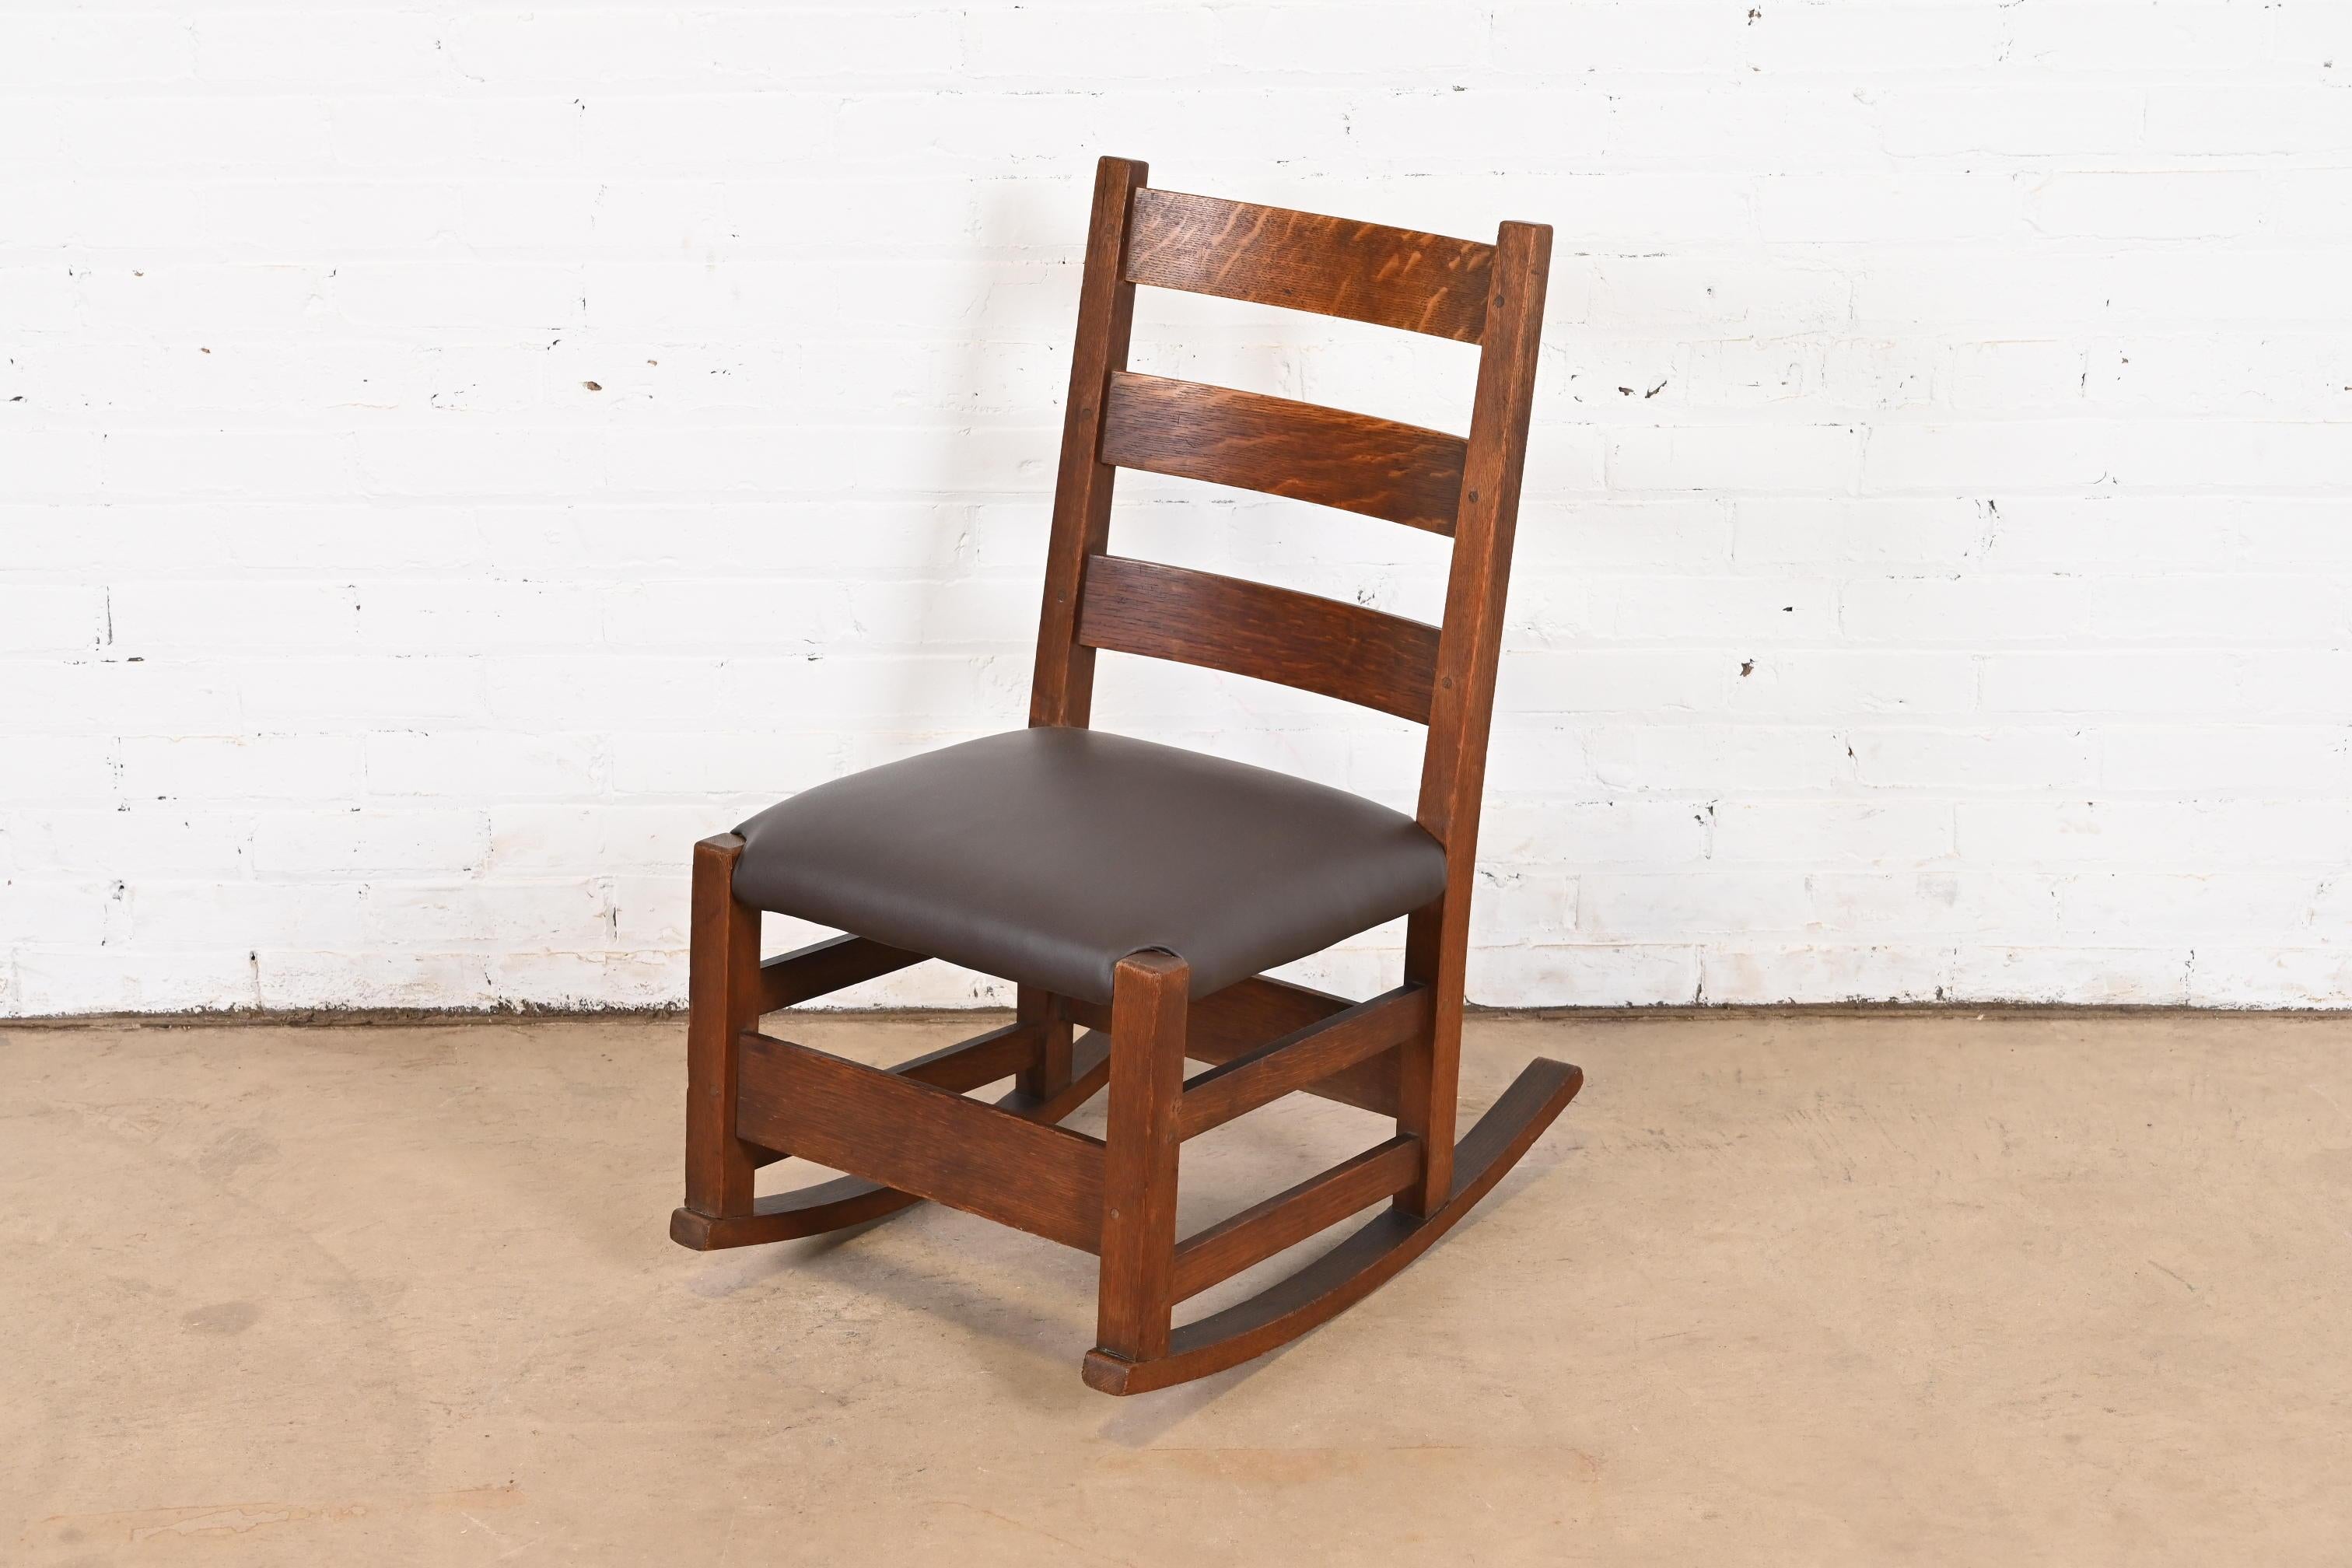 A gorgeous antique Mission or Arts & Crafts sewing or nursing rocker

By Gustav Stickley

USA, Circa 1900

Solid quarter sawn oak, with brown leather seat.

Measures: 17